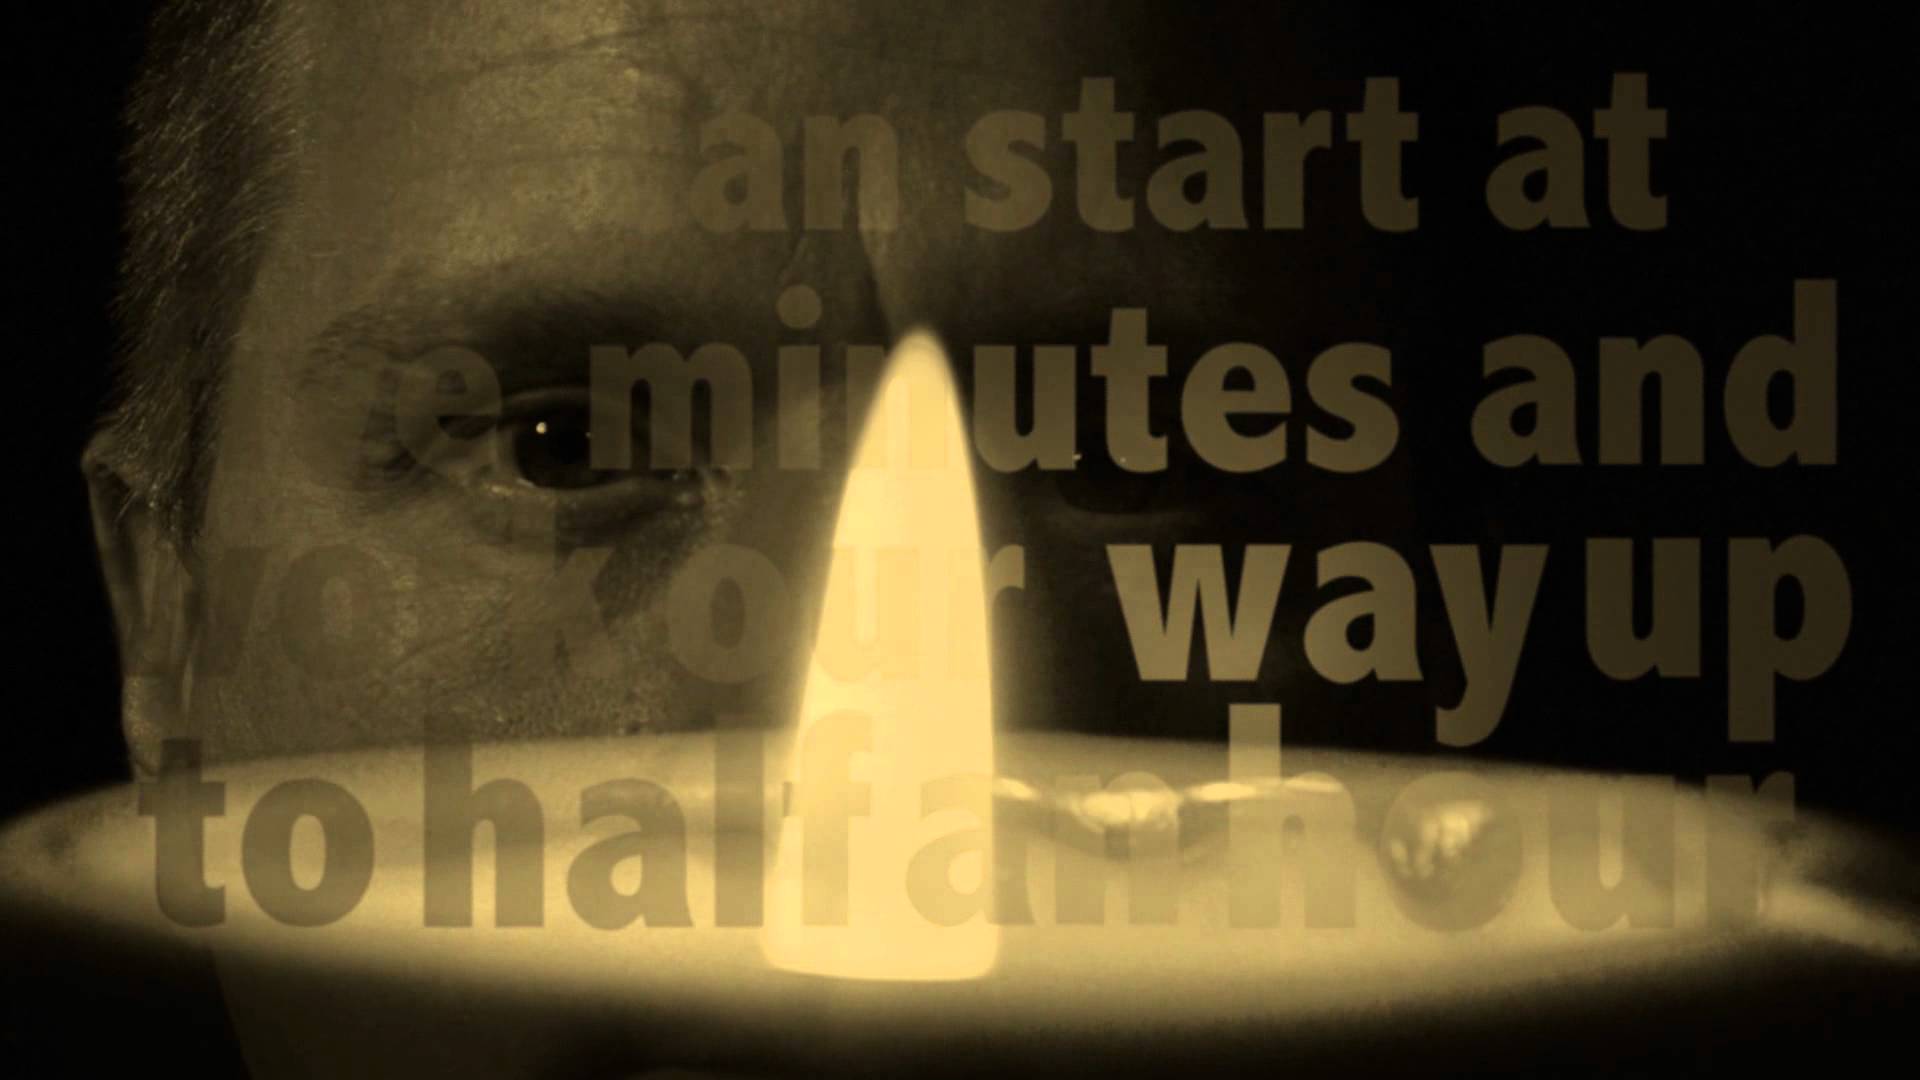 Video : How to Meditate Part 5: “Candle Flame Gazing”